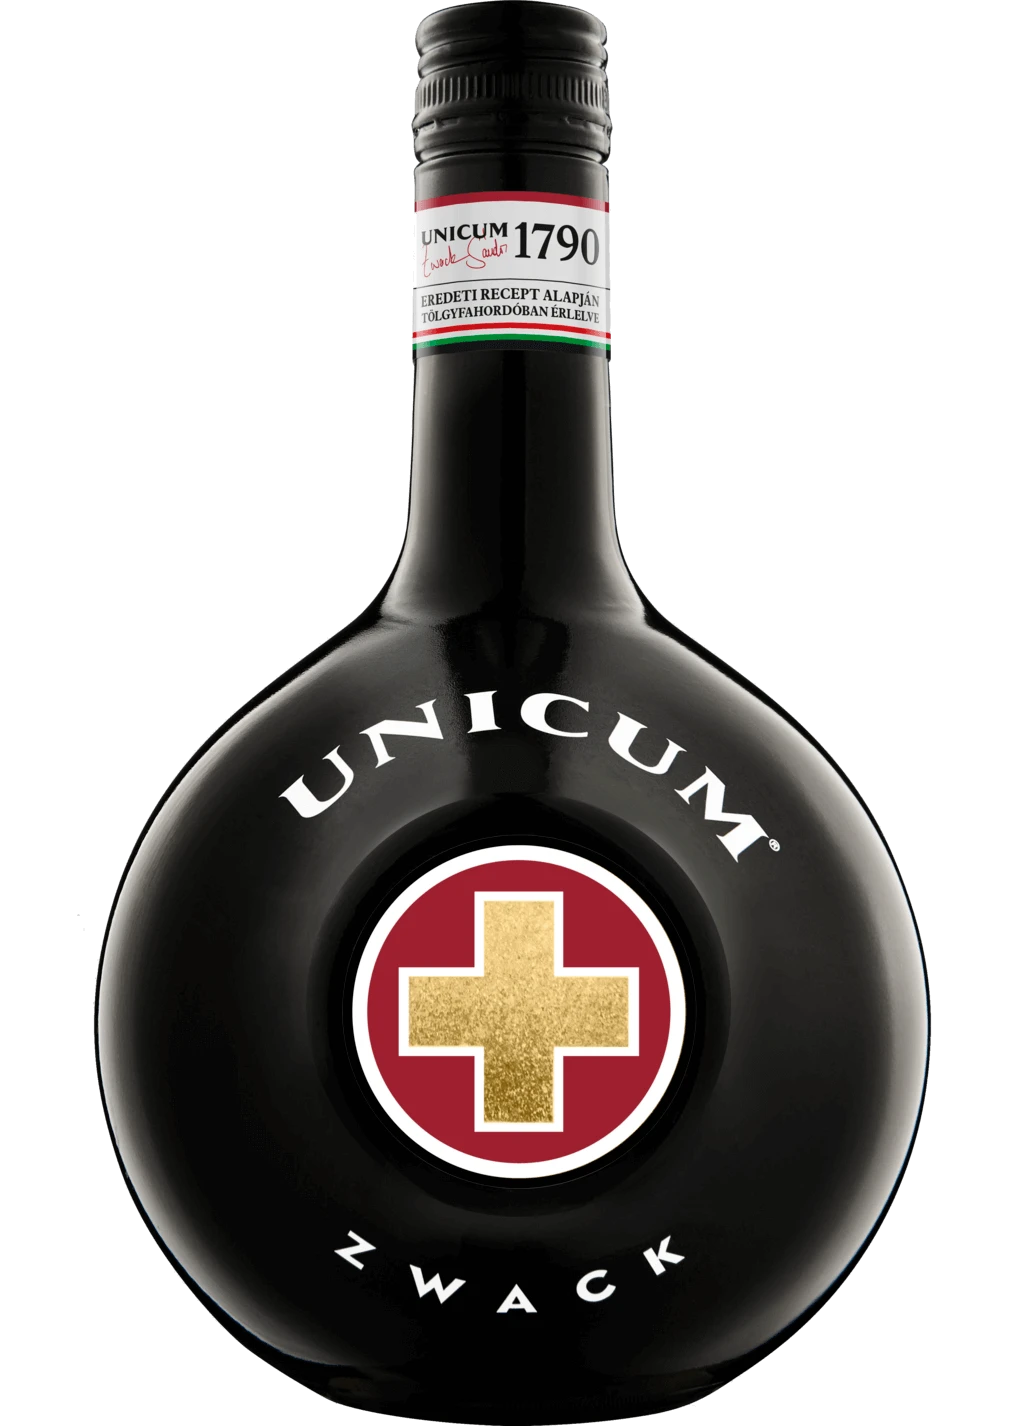 Unicum is a great souvenir from Barcelona